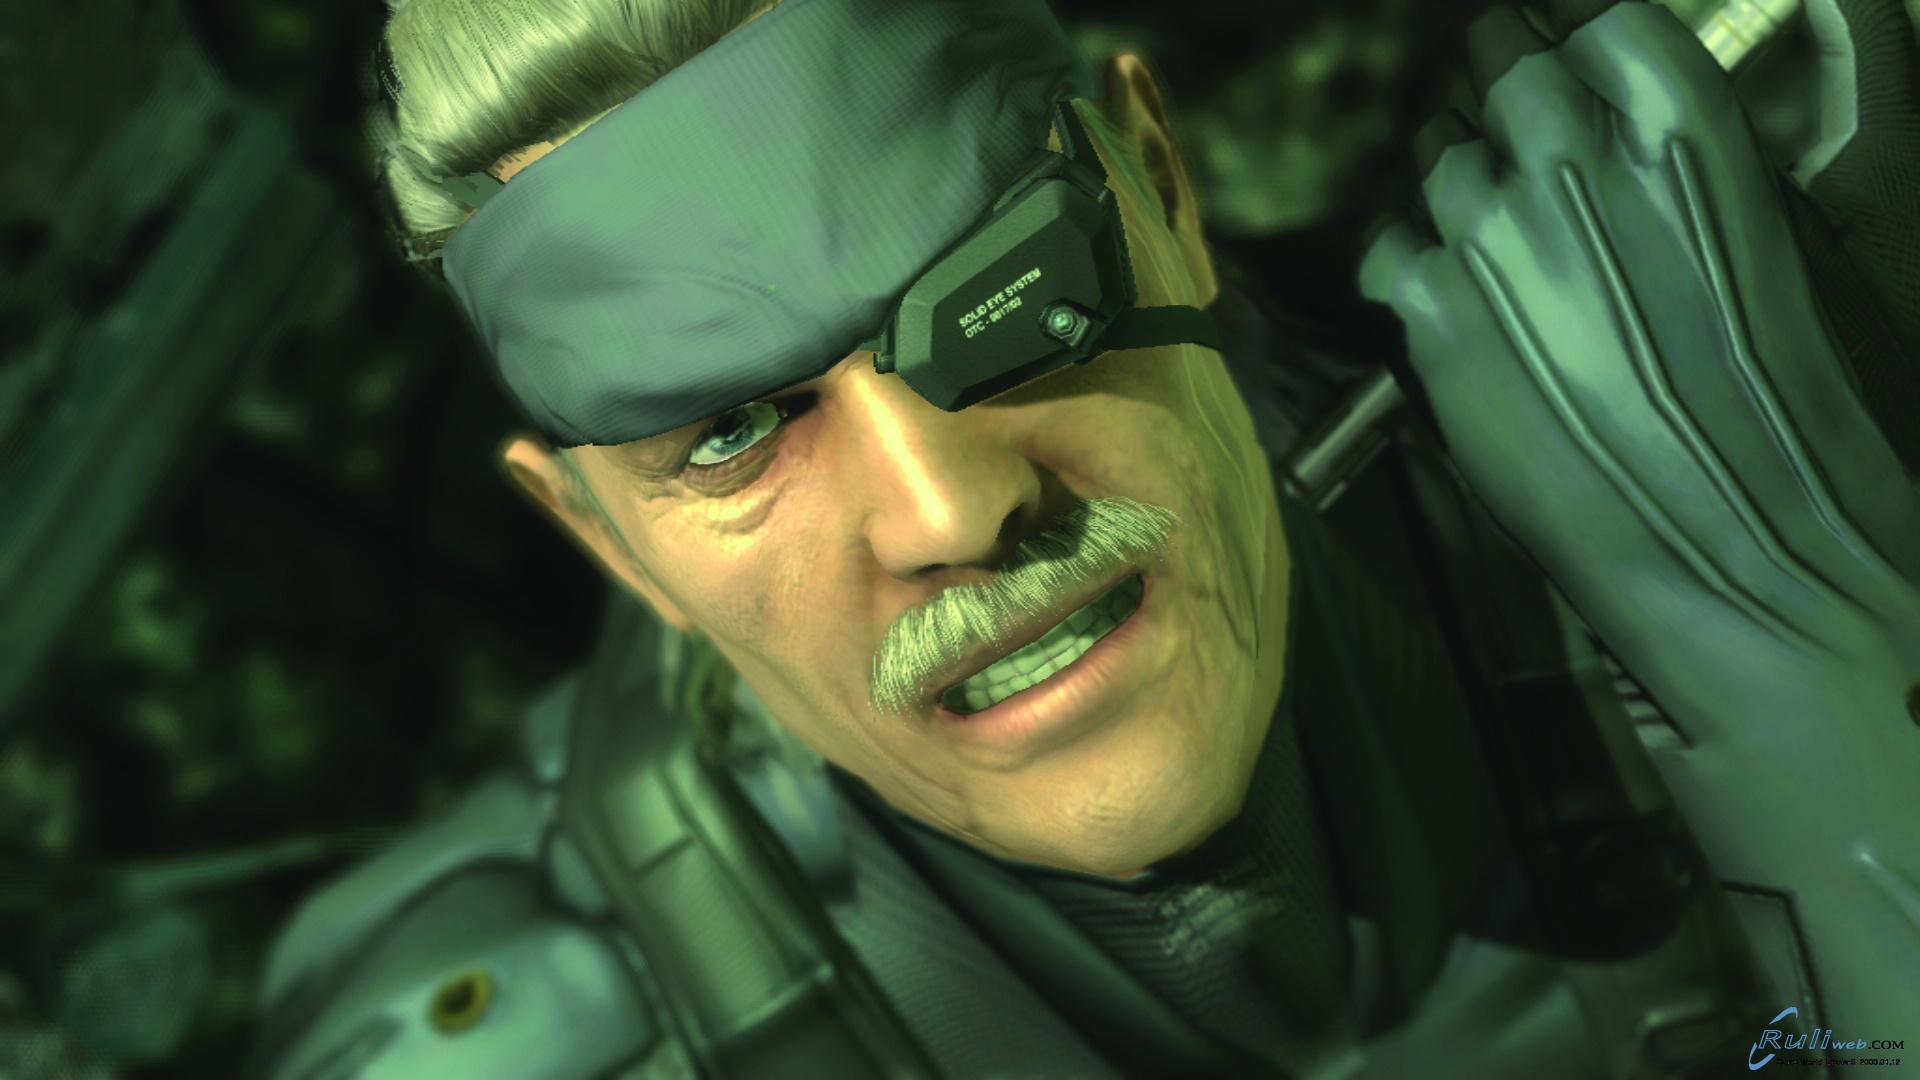 Snake Mgs Playstation Metal Gear Solid Game Wallpaper